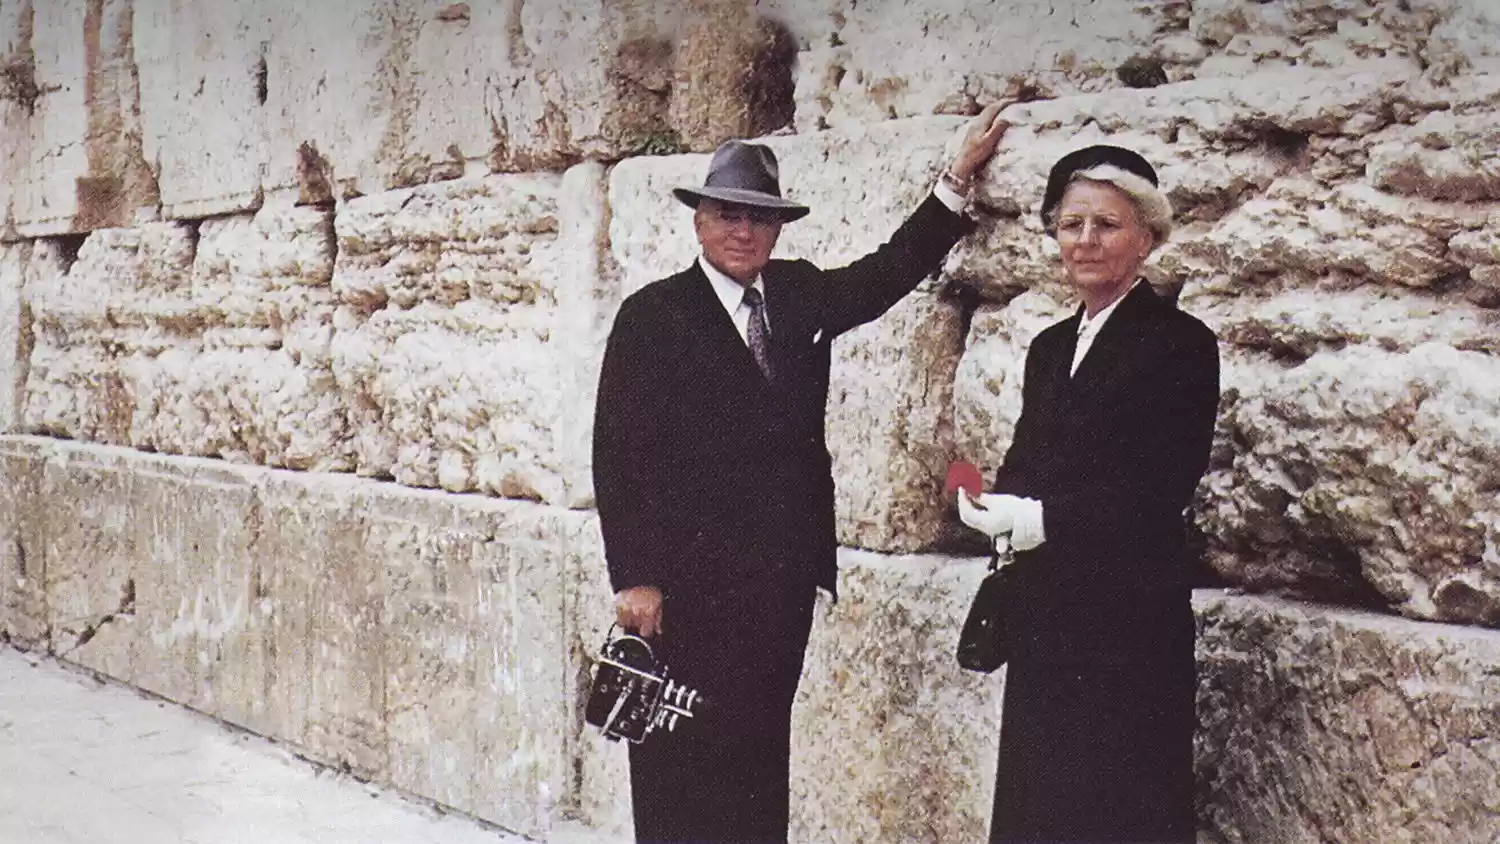 HWA first visit at the Wailing Wall with his wife, Loma_1956(colour).